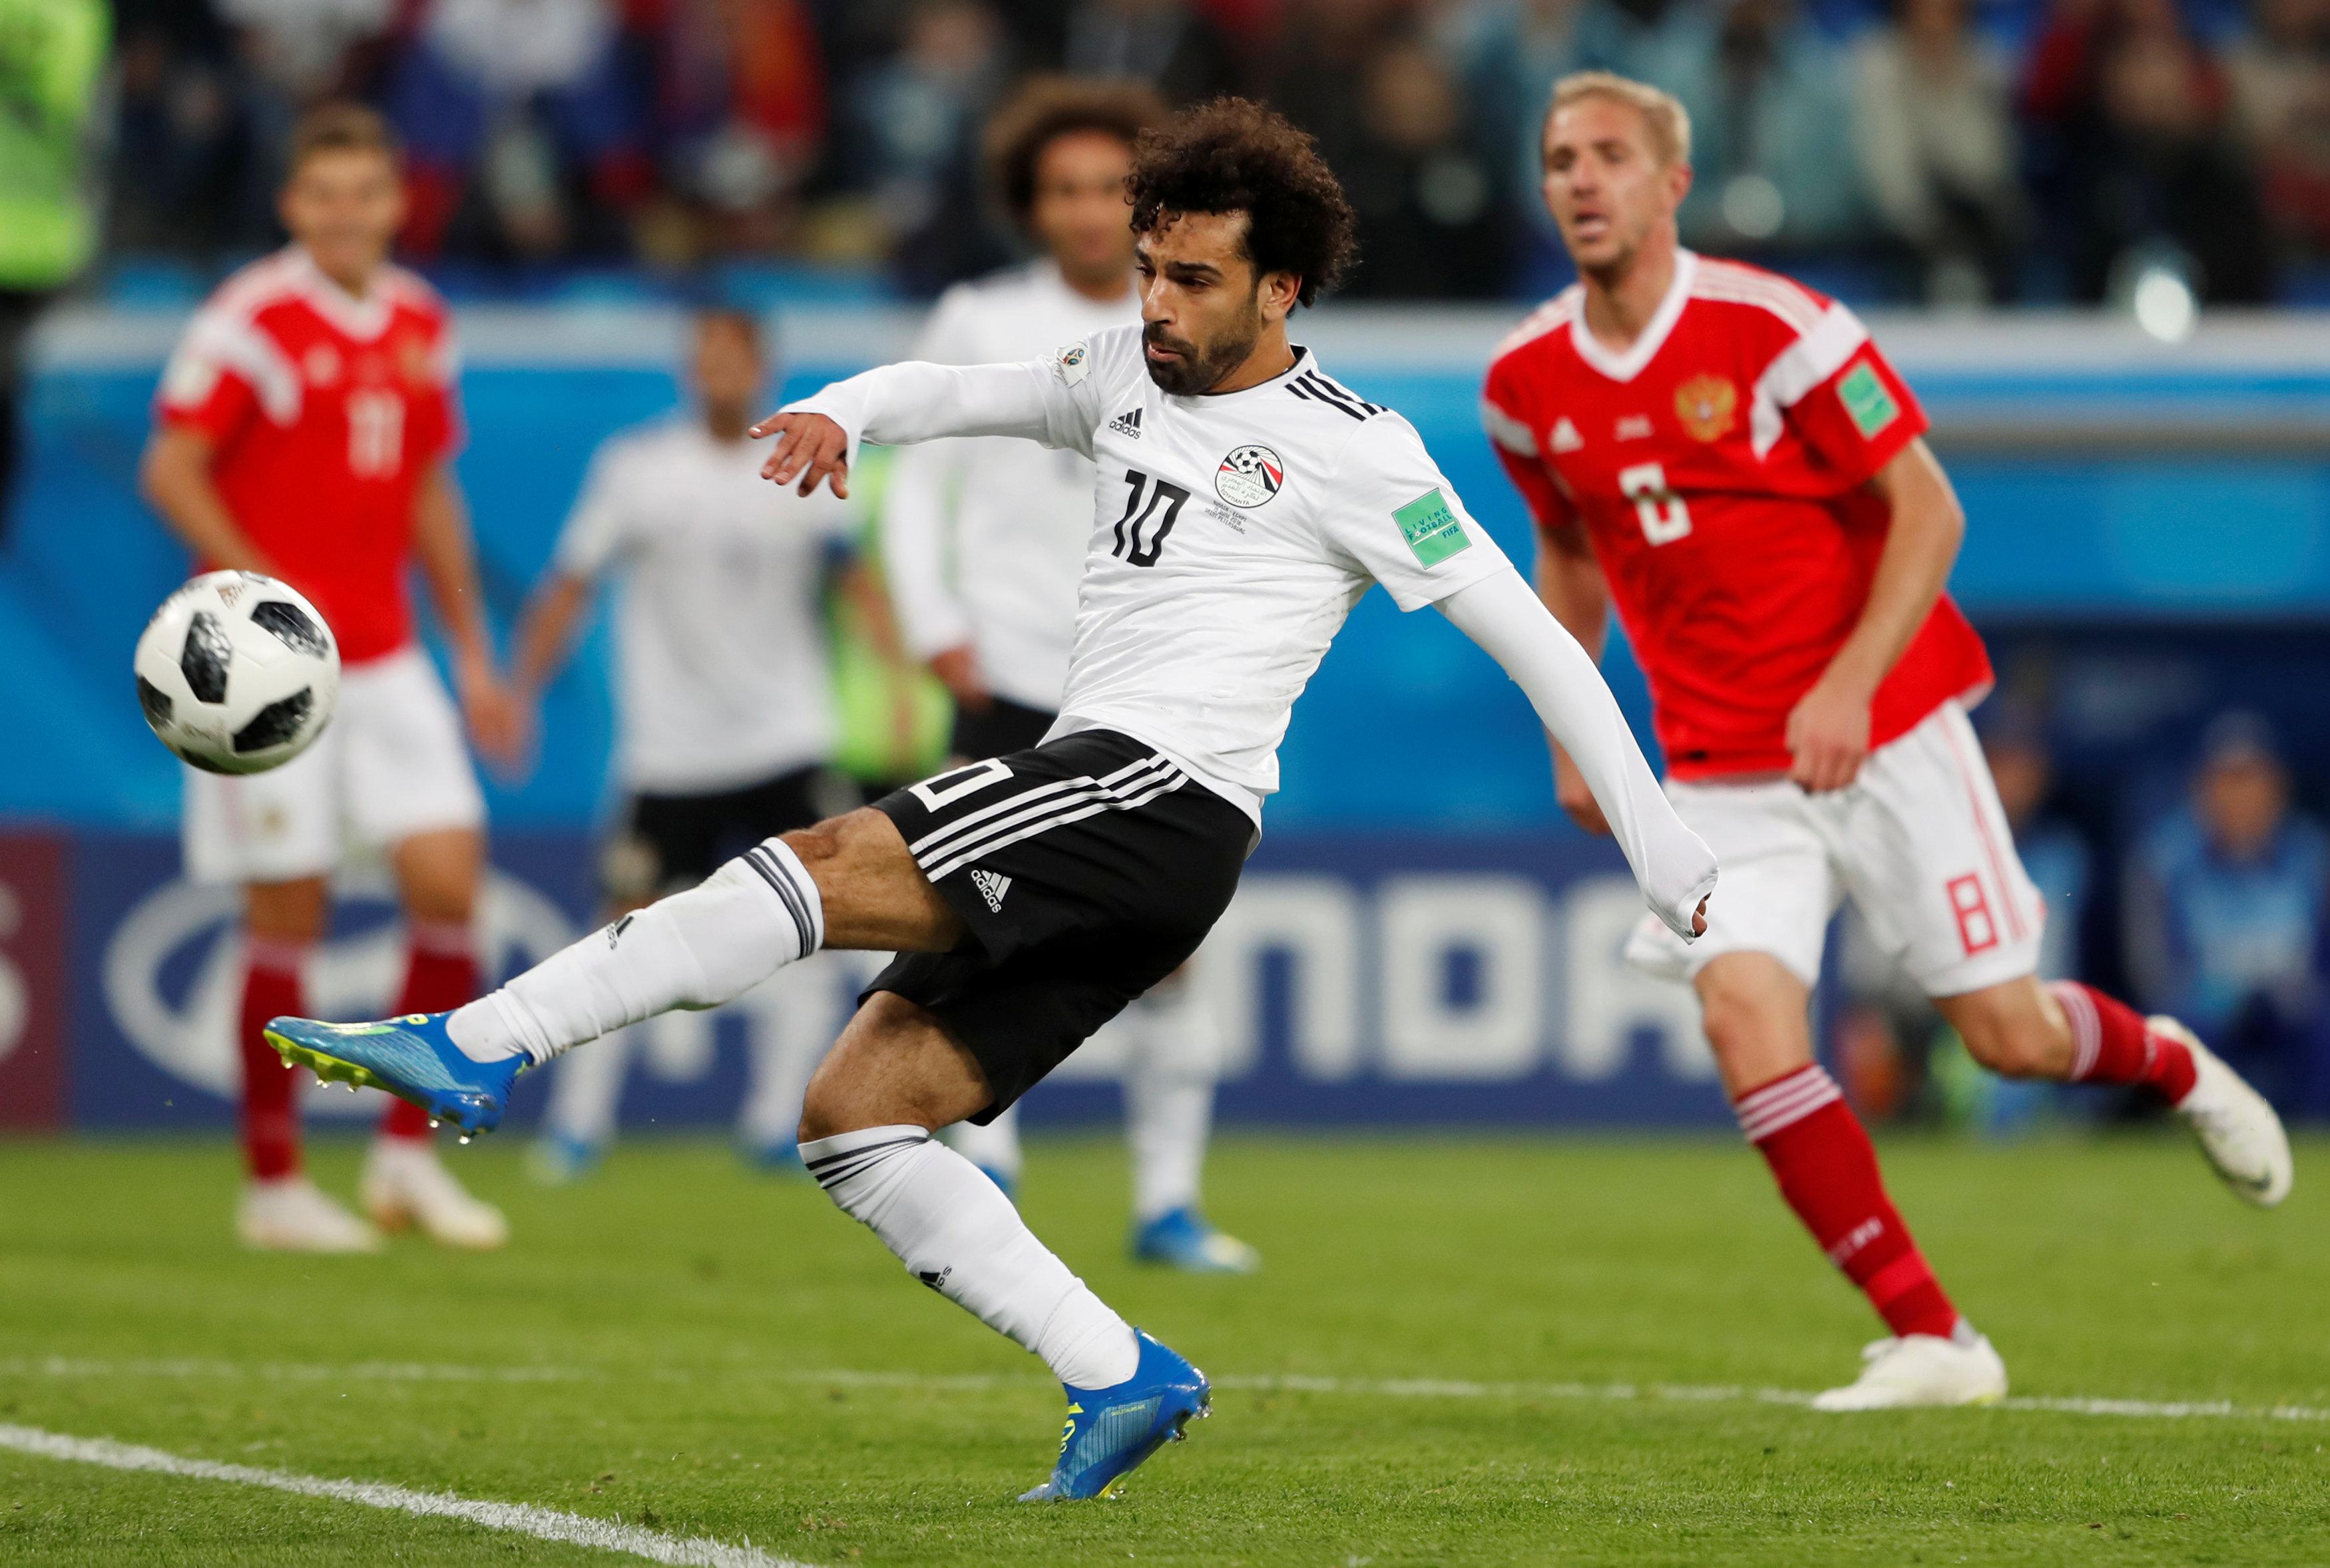 Mohamed Salah during the World Cup match between Russia and Egypt at the Saint Petersburg Stadium, Saint Petersburg, Russia - June 19, 2018 REUTERS/File photo